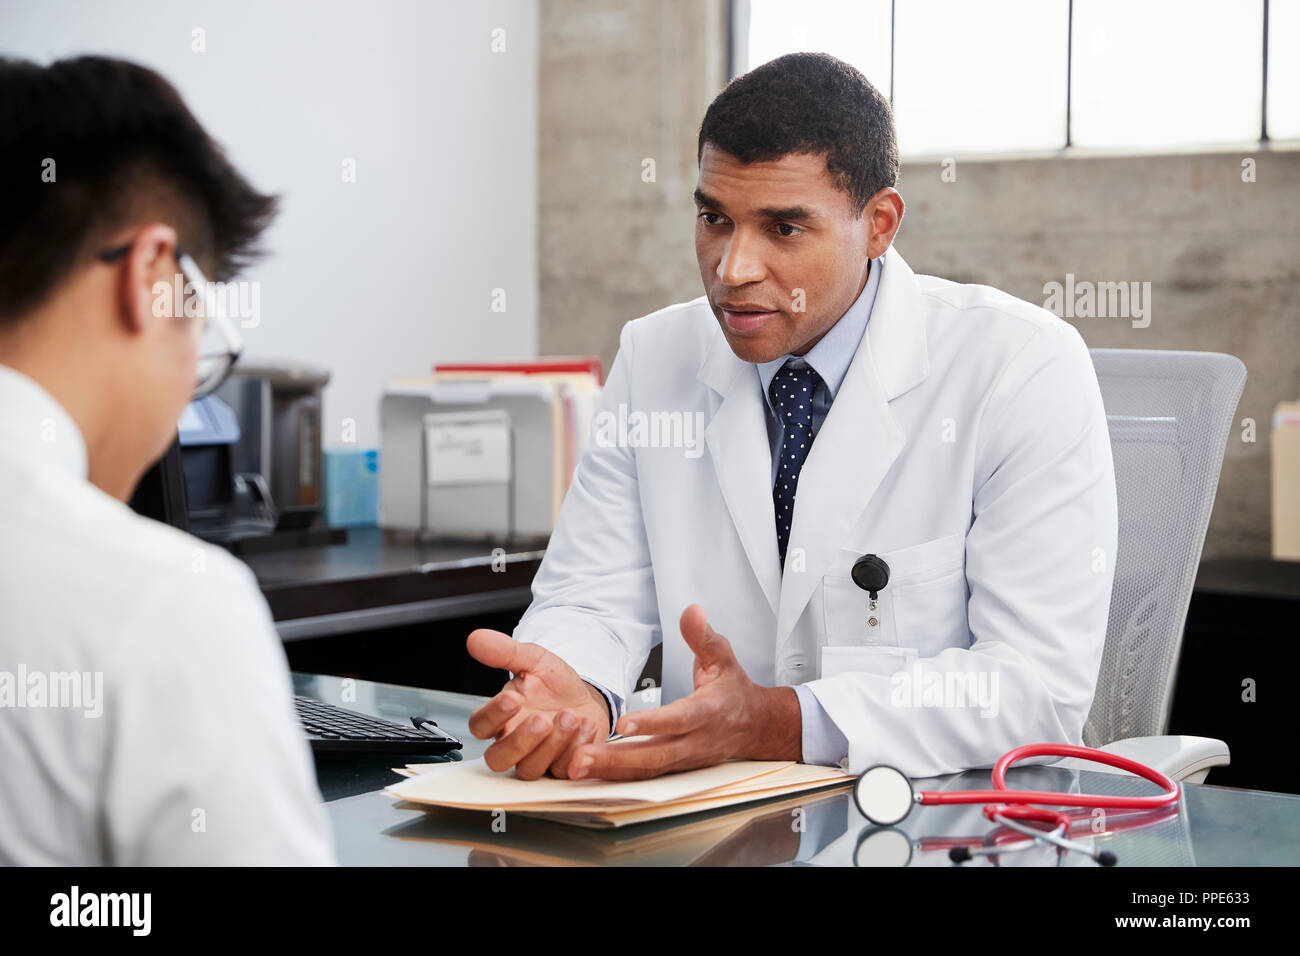 Concerned mixed race male doctor counselling male patient Stock Photo